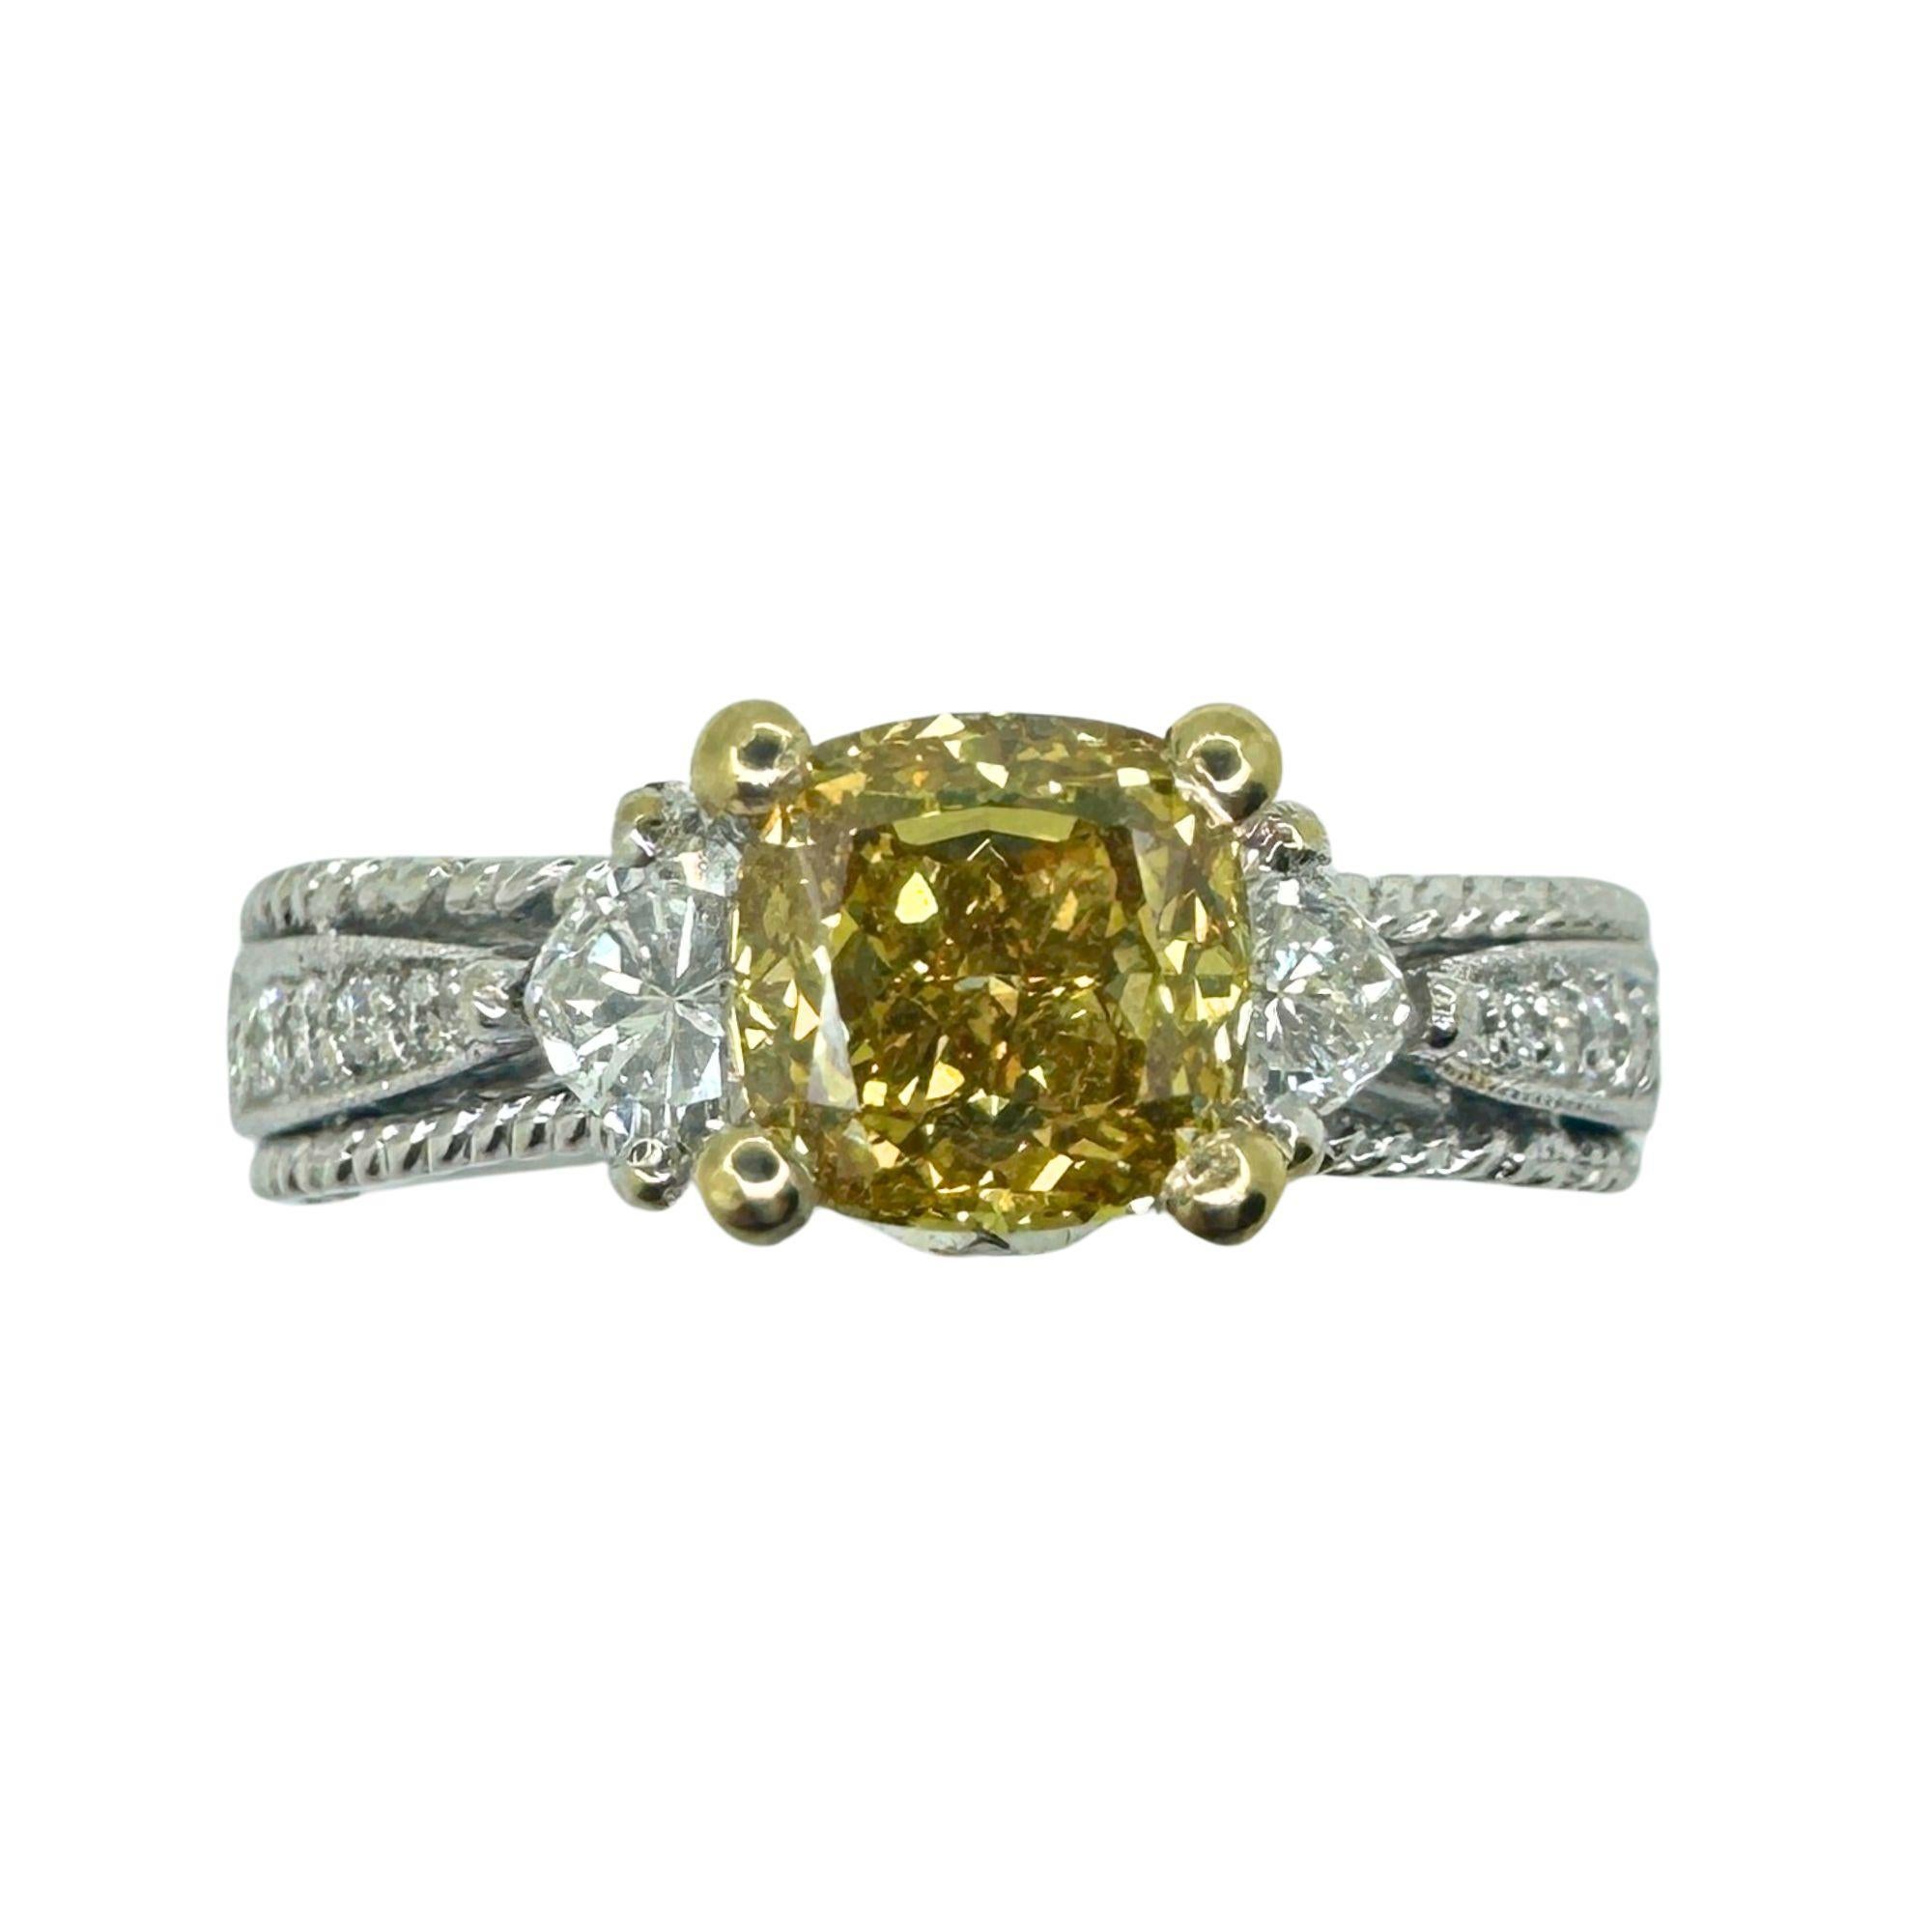 This 18k White and Yellow Diamond Ring is a stunning choice. Crafted from 18k white gold and featuring a total of 1.54 carats of sparkling diamonds, this ring is sure to catch the eye. With a ring size of 6.75 and a weight of 5.56 grams, it's the